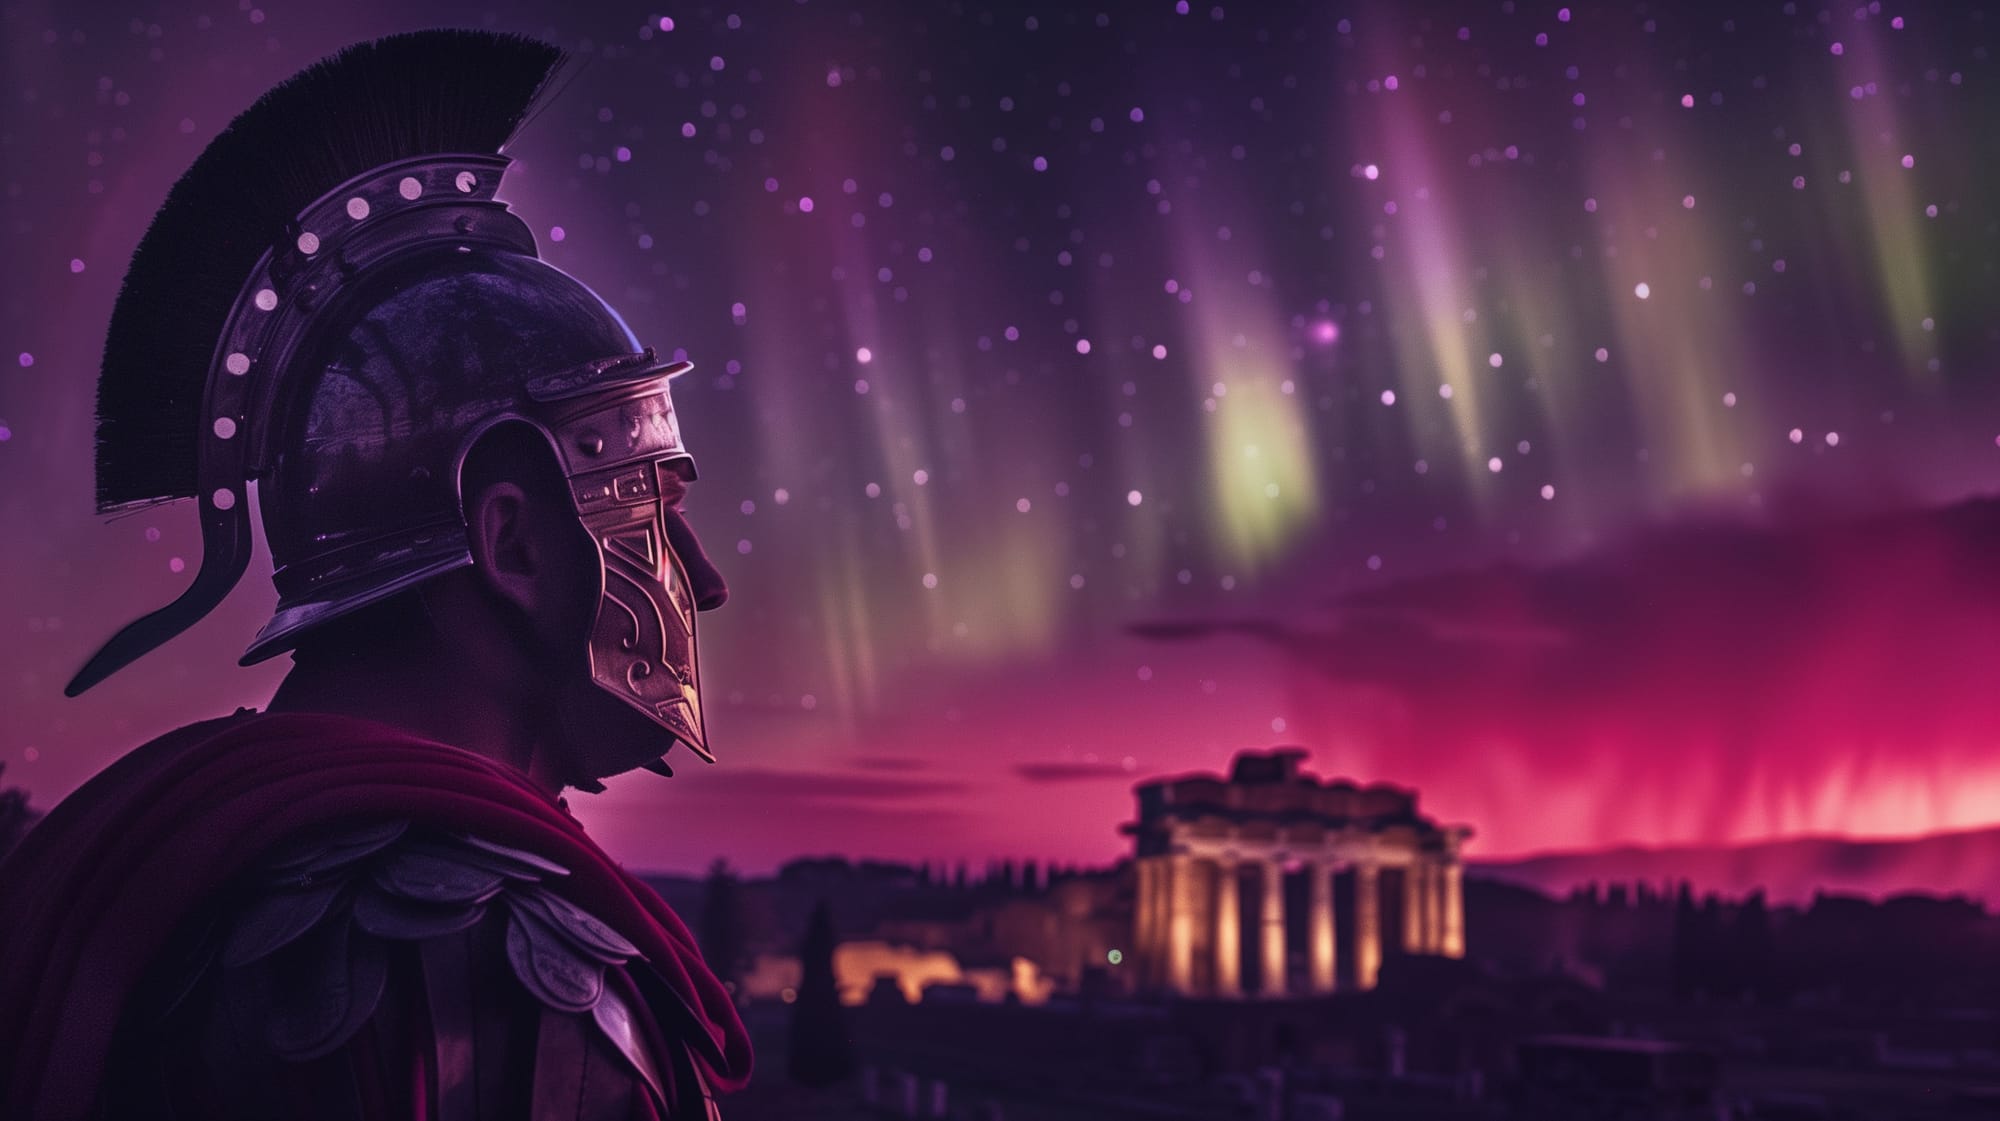 A Roman soldier staring at the wonderful spectacle of the Northern Lights appearing over a Roman city under the night sky.